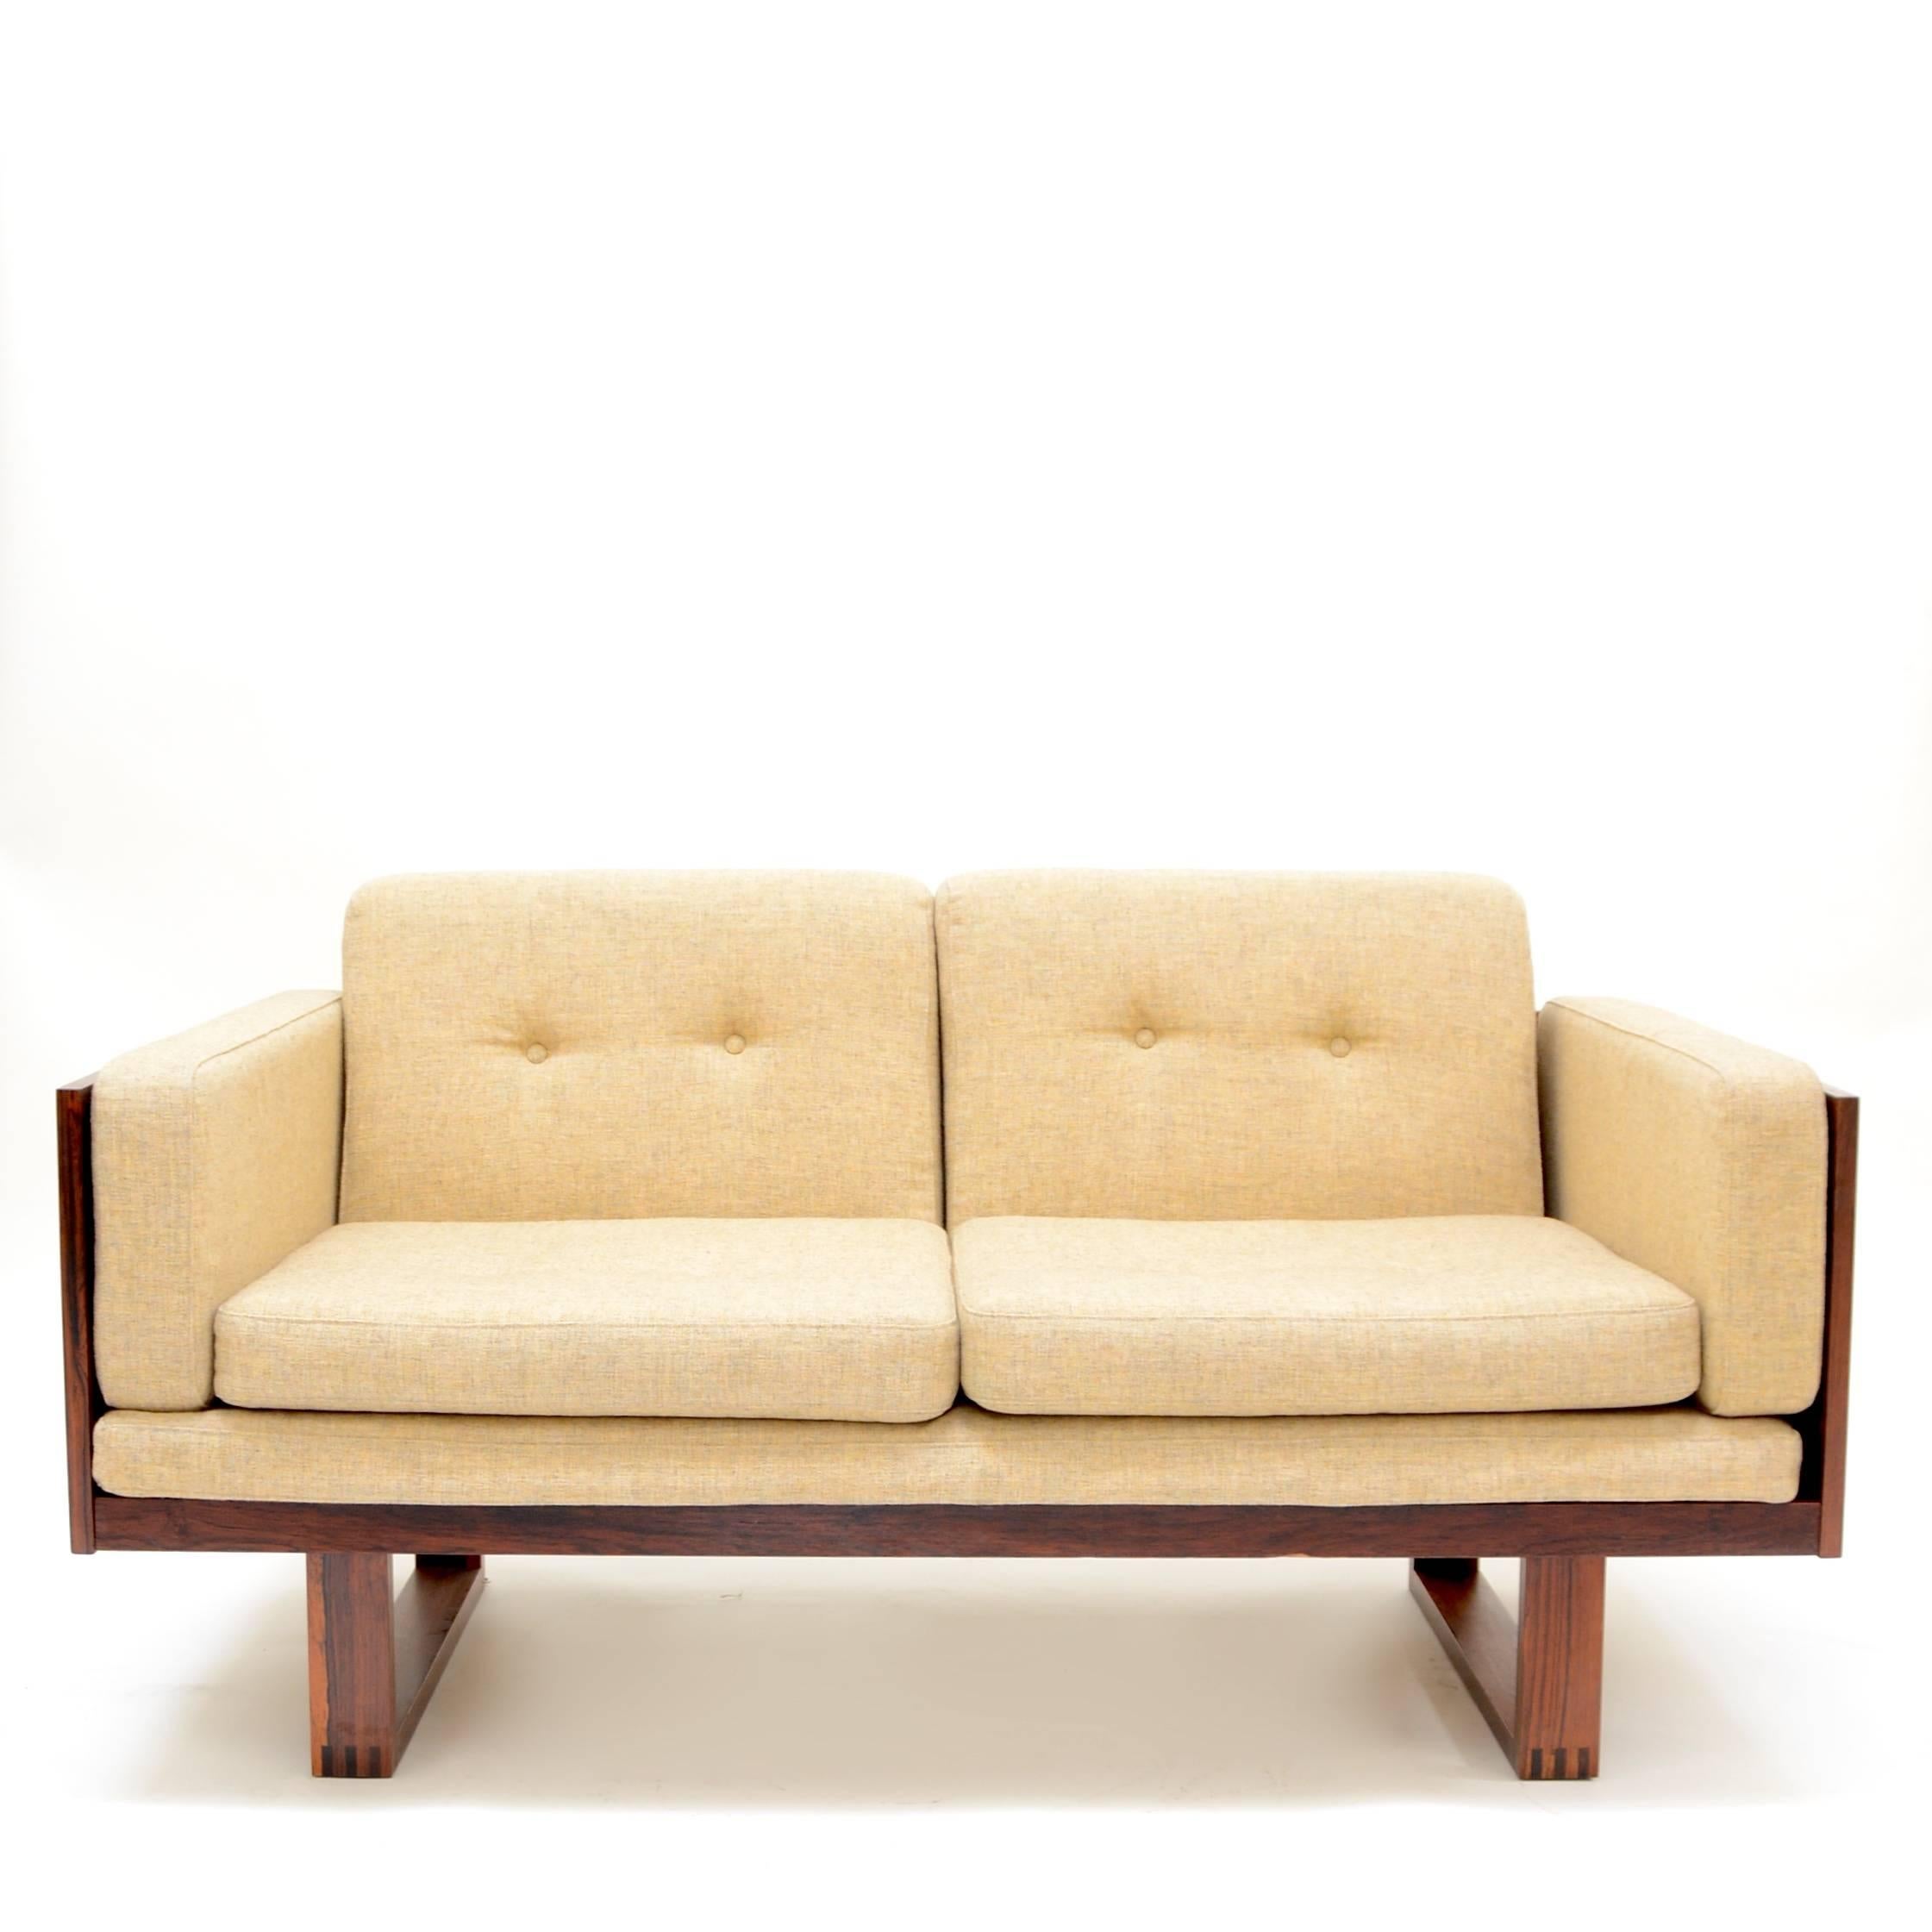 Two-seat sofa and chair set, in Brazilian rosewood by Poul Cadovius for France & Søn, Denmark, 1960s. The matching chair is also available, see separate listing.

This set is located at our downtown Los Angeles location. Please inquire for